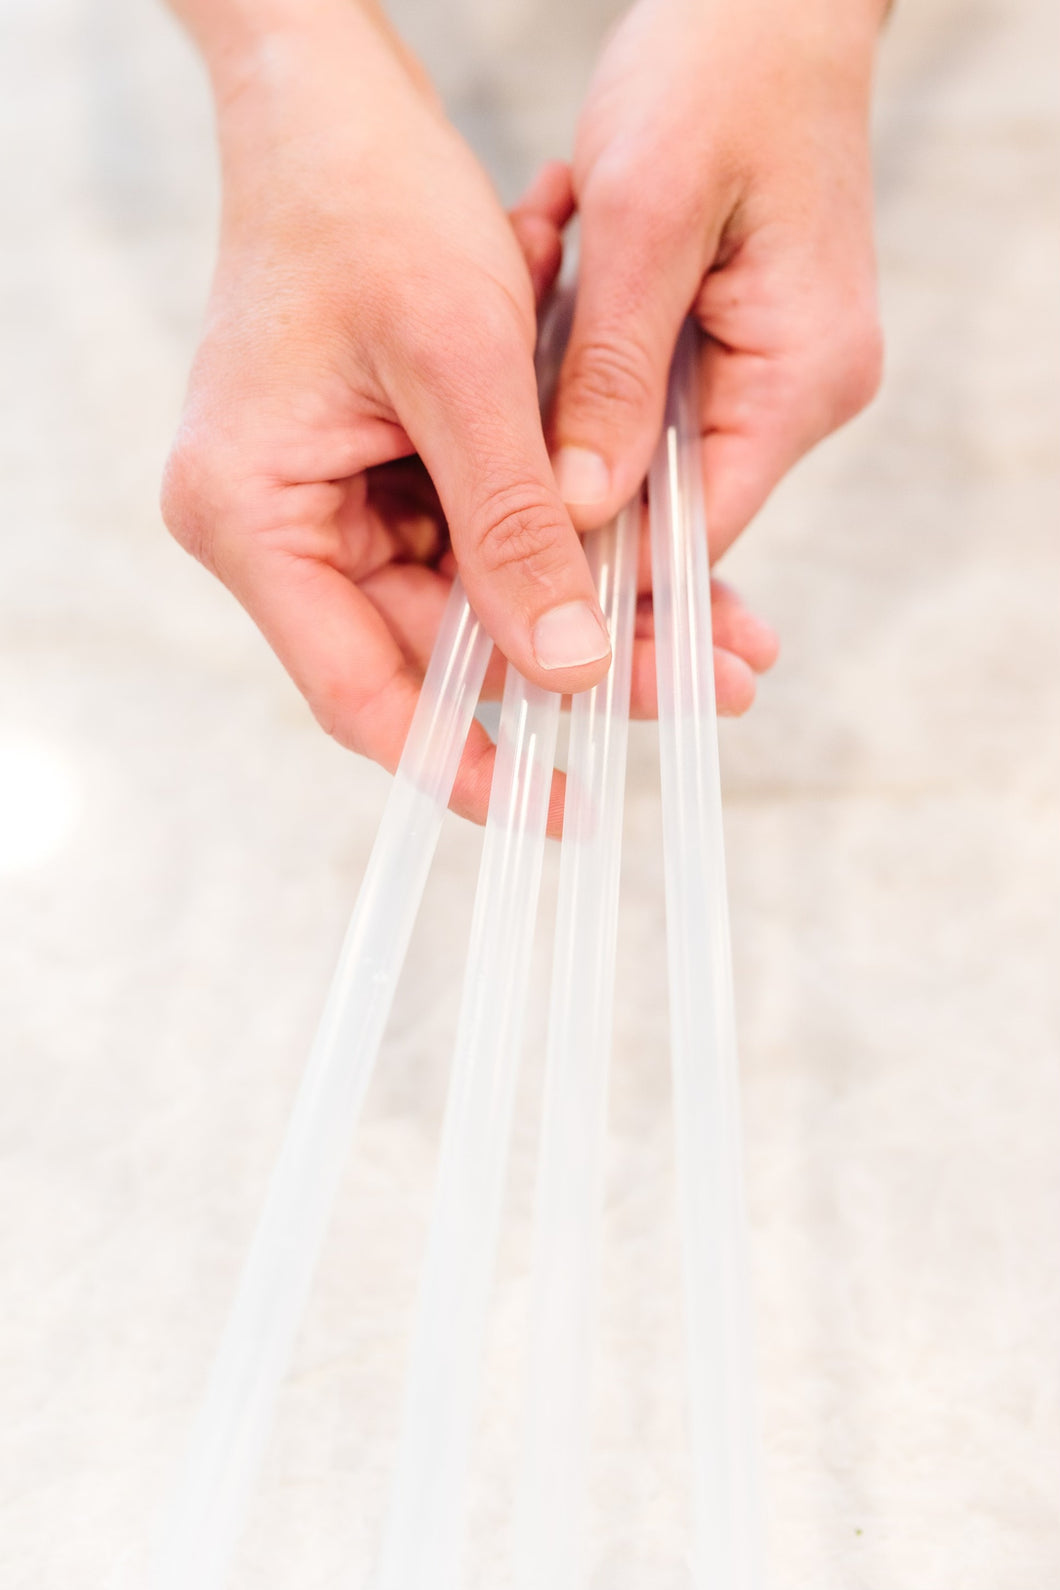 Quick Cup Fix STRAWS- 4 Pack... (scroll down for stoppers)